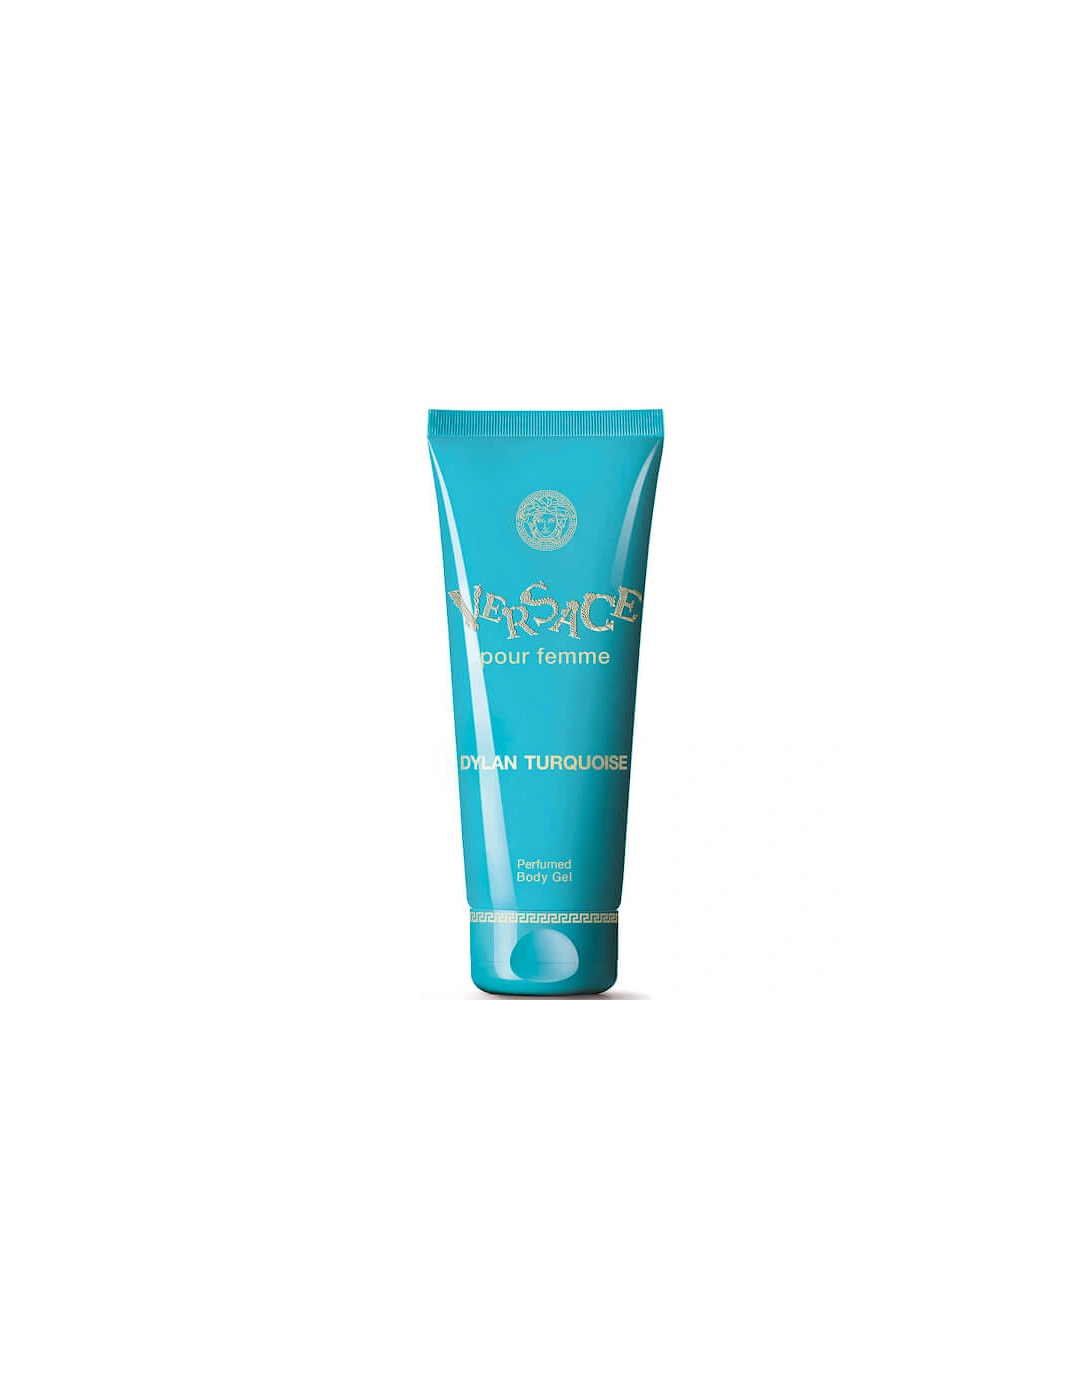 Pour Femme Dylan Turquoise Body Gel 200ml, 2 of 1